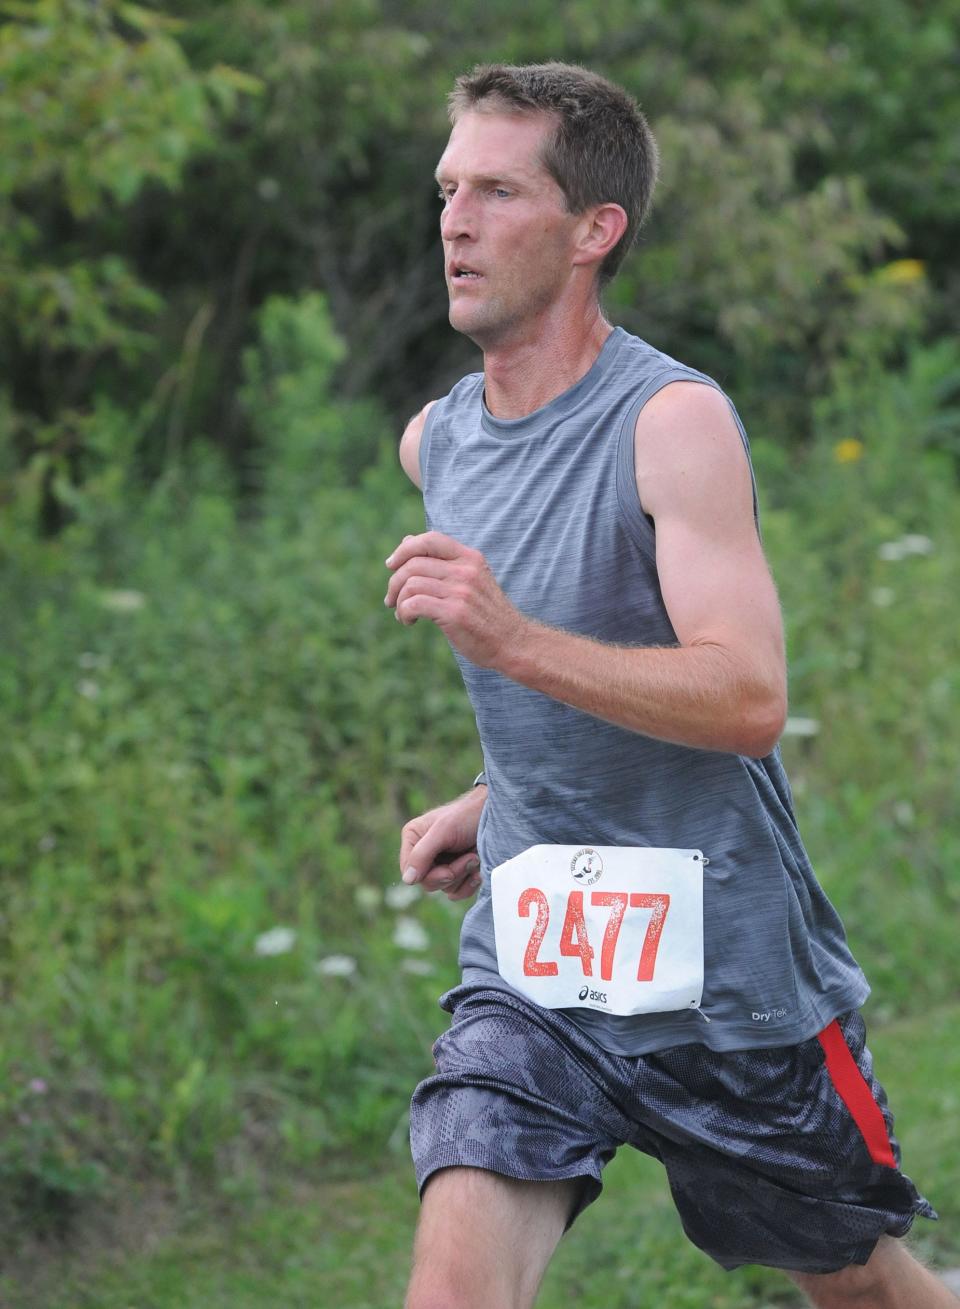 Gary Pate crosses the finish line first as the overall winner Tuesday, Aug. 9, 2022, in the Carnation 5K Trail Run at the Iron Horse Trail in Washington Township.